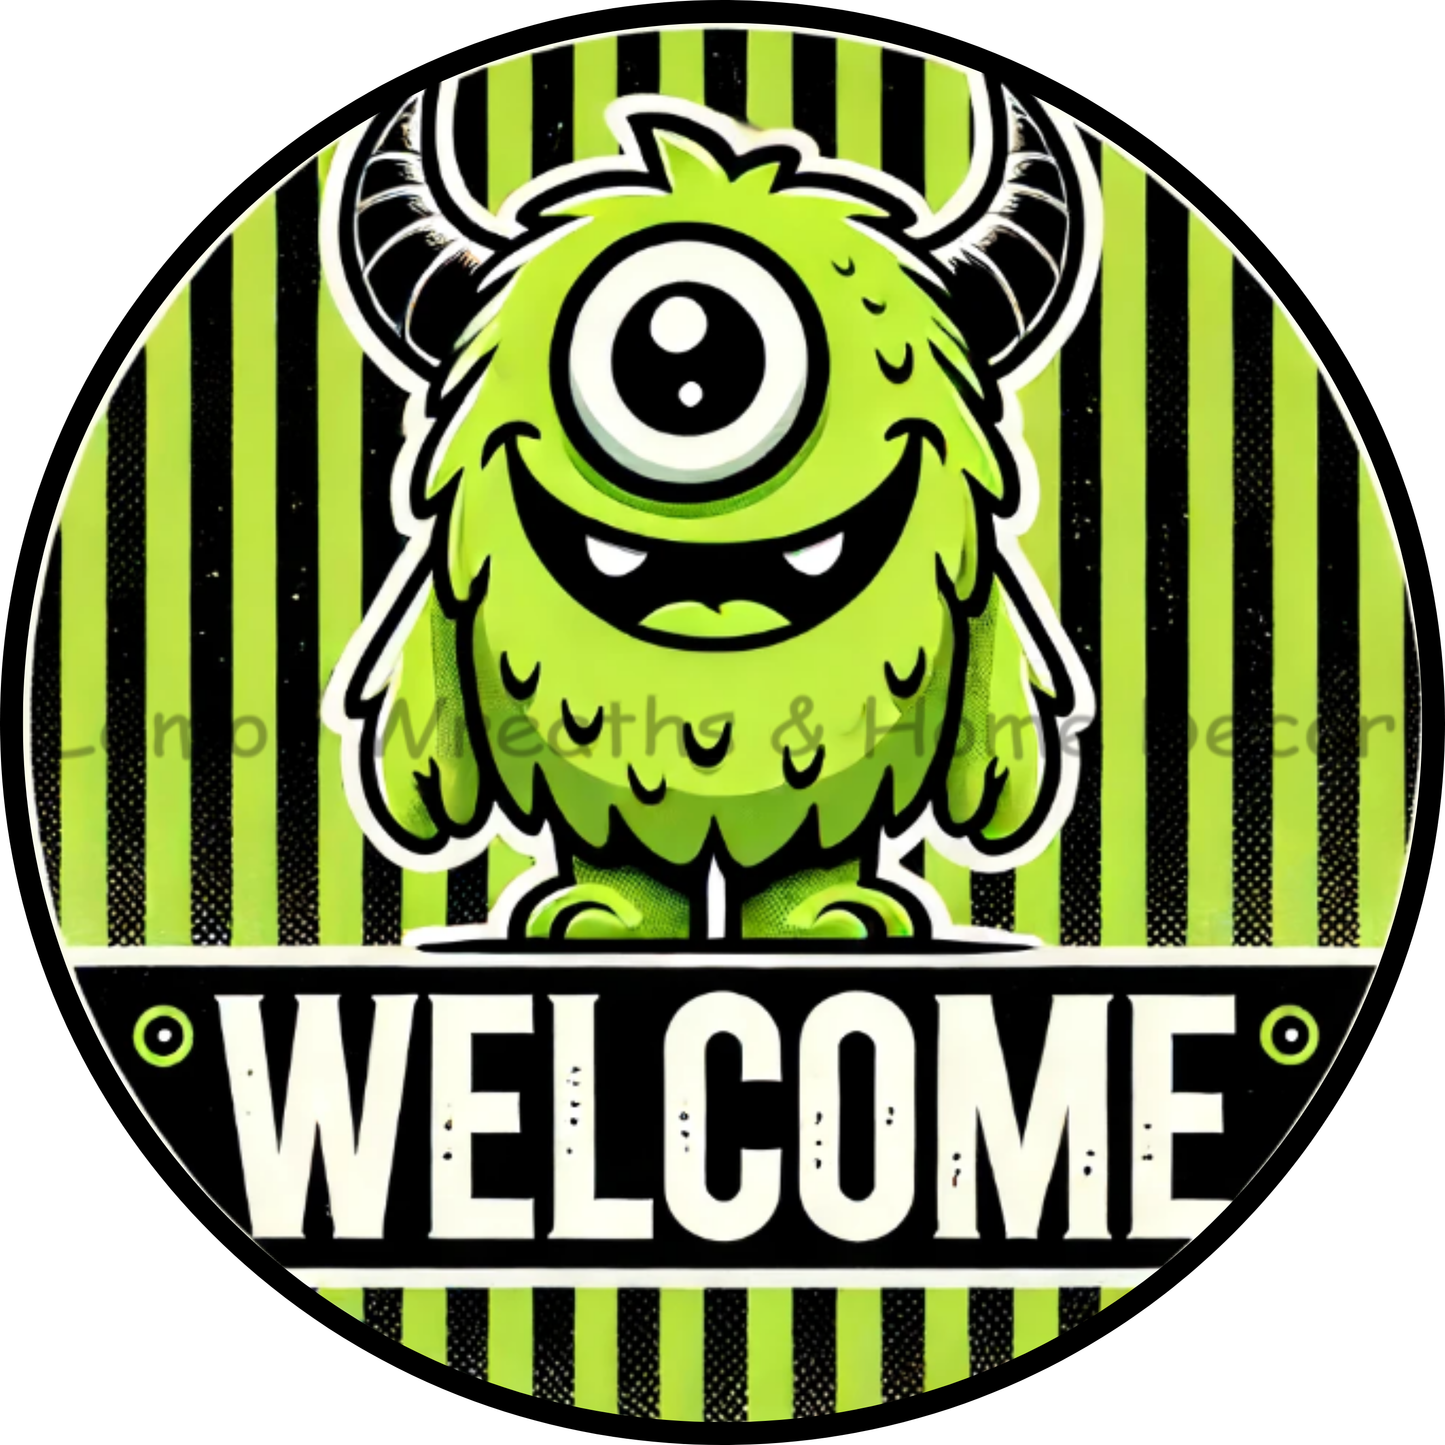 Furry One Eyed Green Halloween Monster Welcome Metal Sign